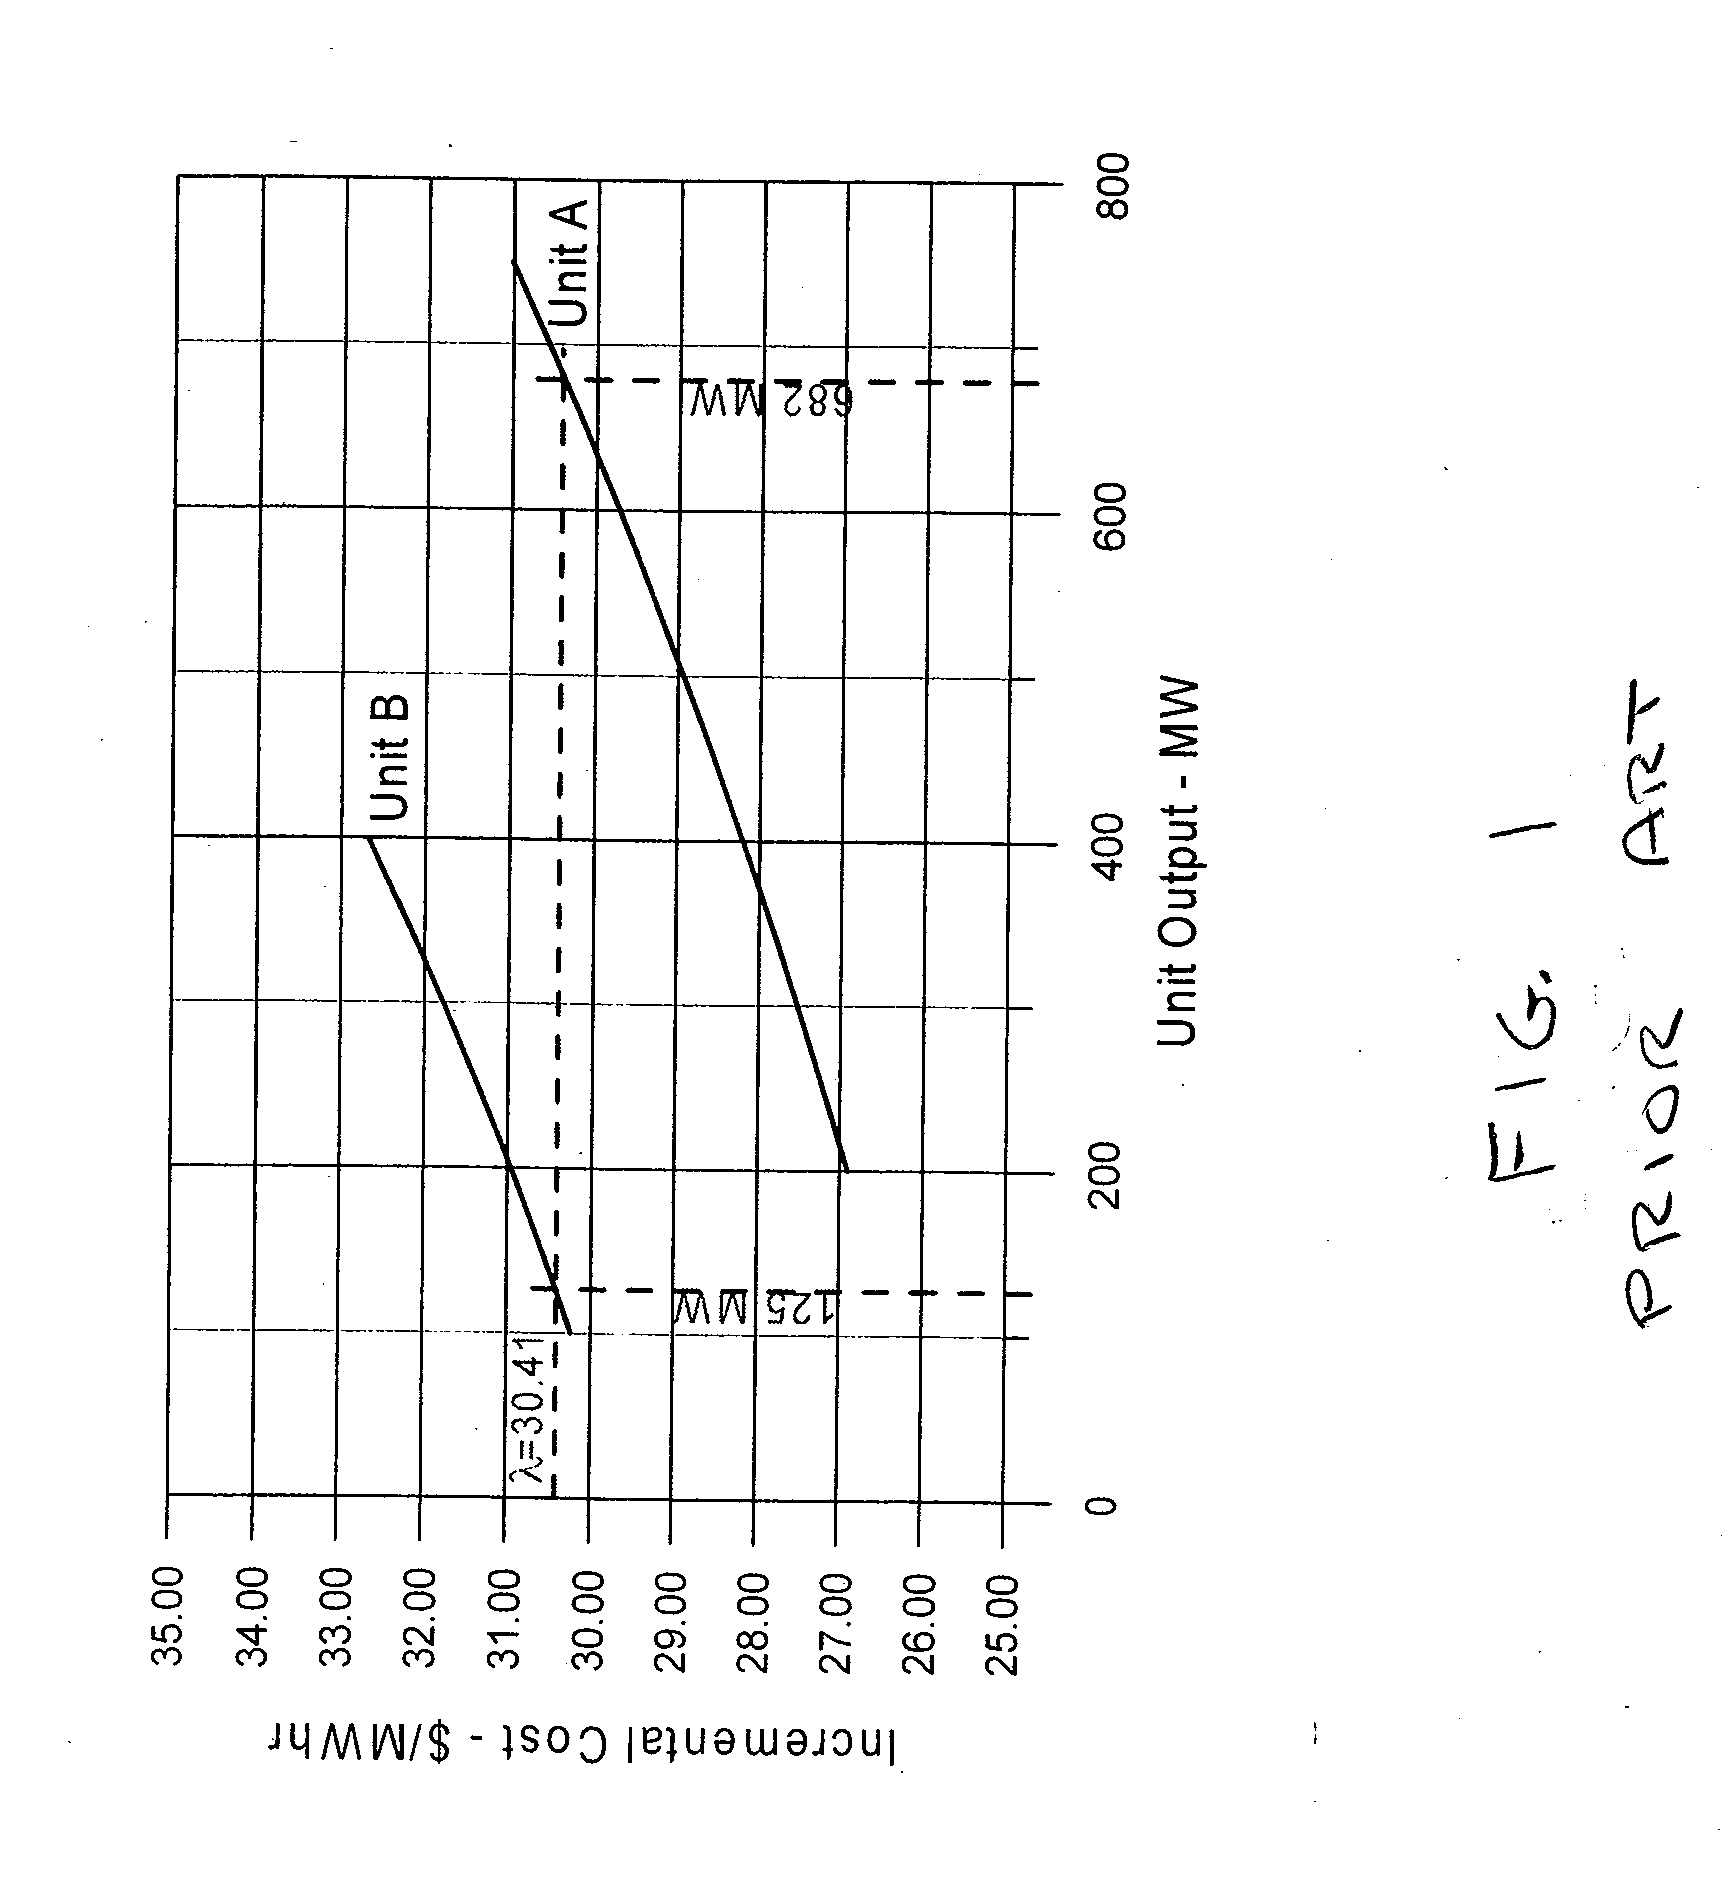 Systems and Methods For Calculating And Predicting Near Term Production Cost, Incremental Heat Rate, Capacity and Emissions Of Electric Generation Power Plants Based On Current Operating and, Optionally, Atmospheric Conditions